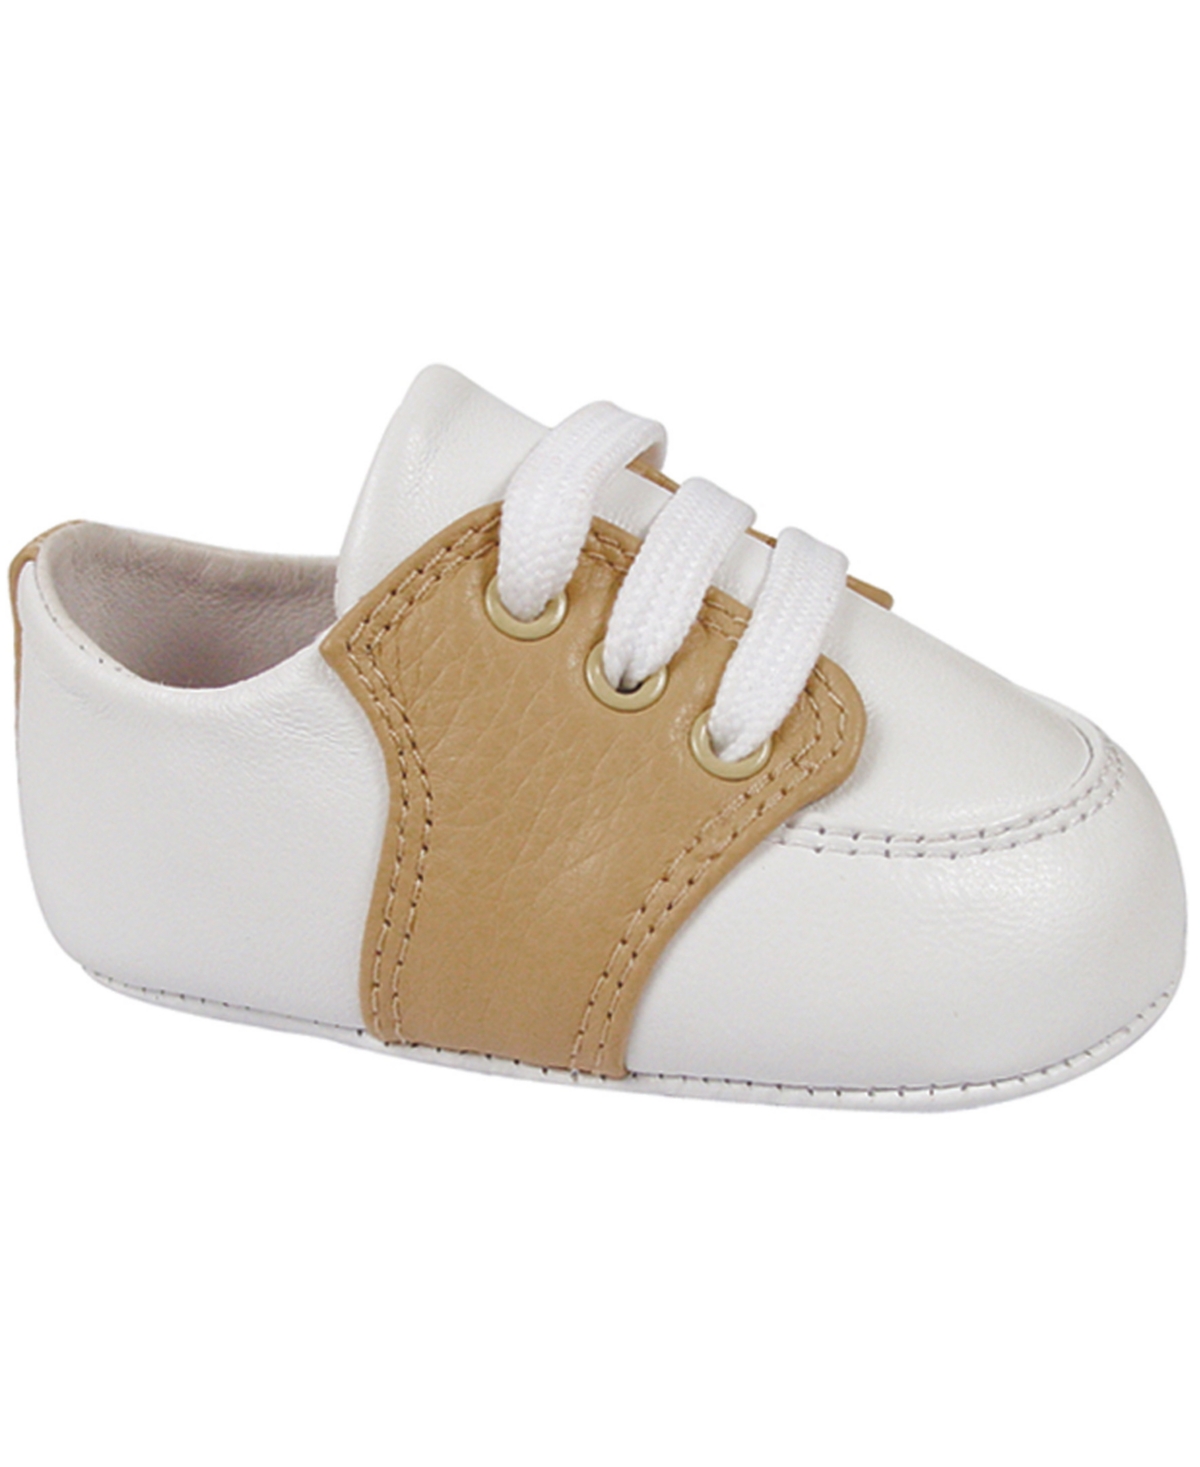 Baby Deer Baby Boy Comfort Laced Leather Saddle Oxford In White